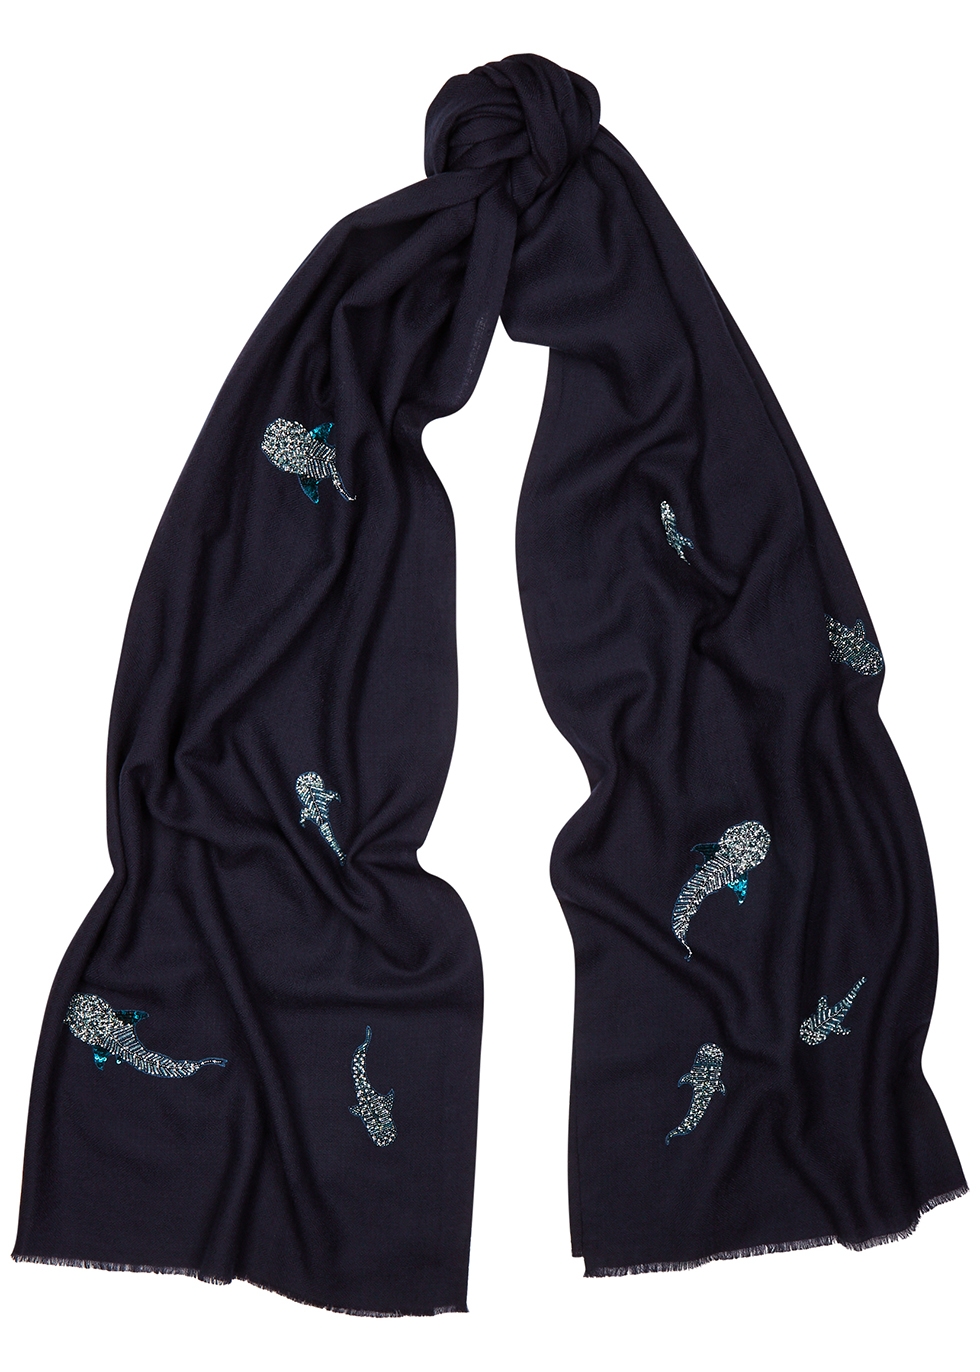 Swimming With Giants embellished wool scarf